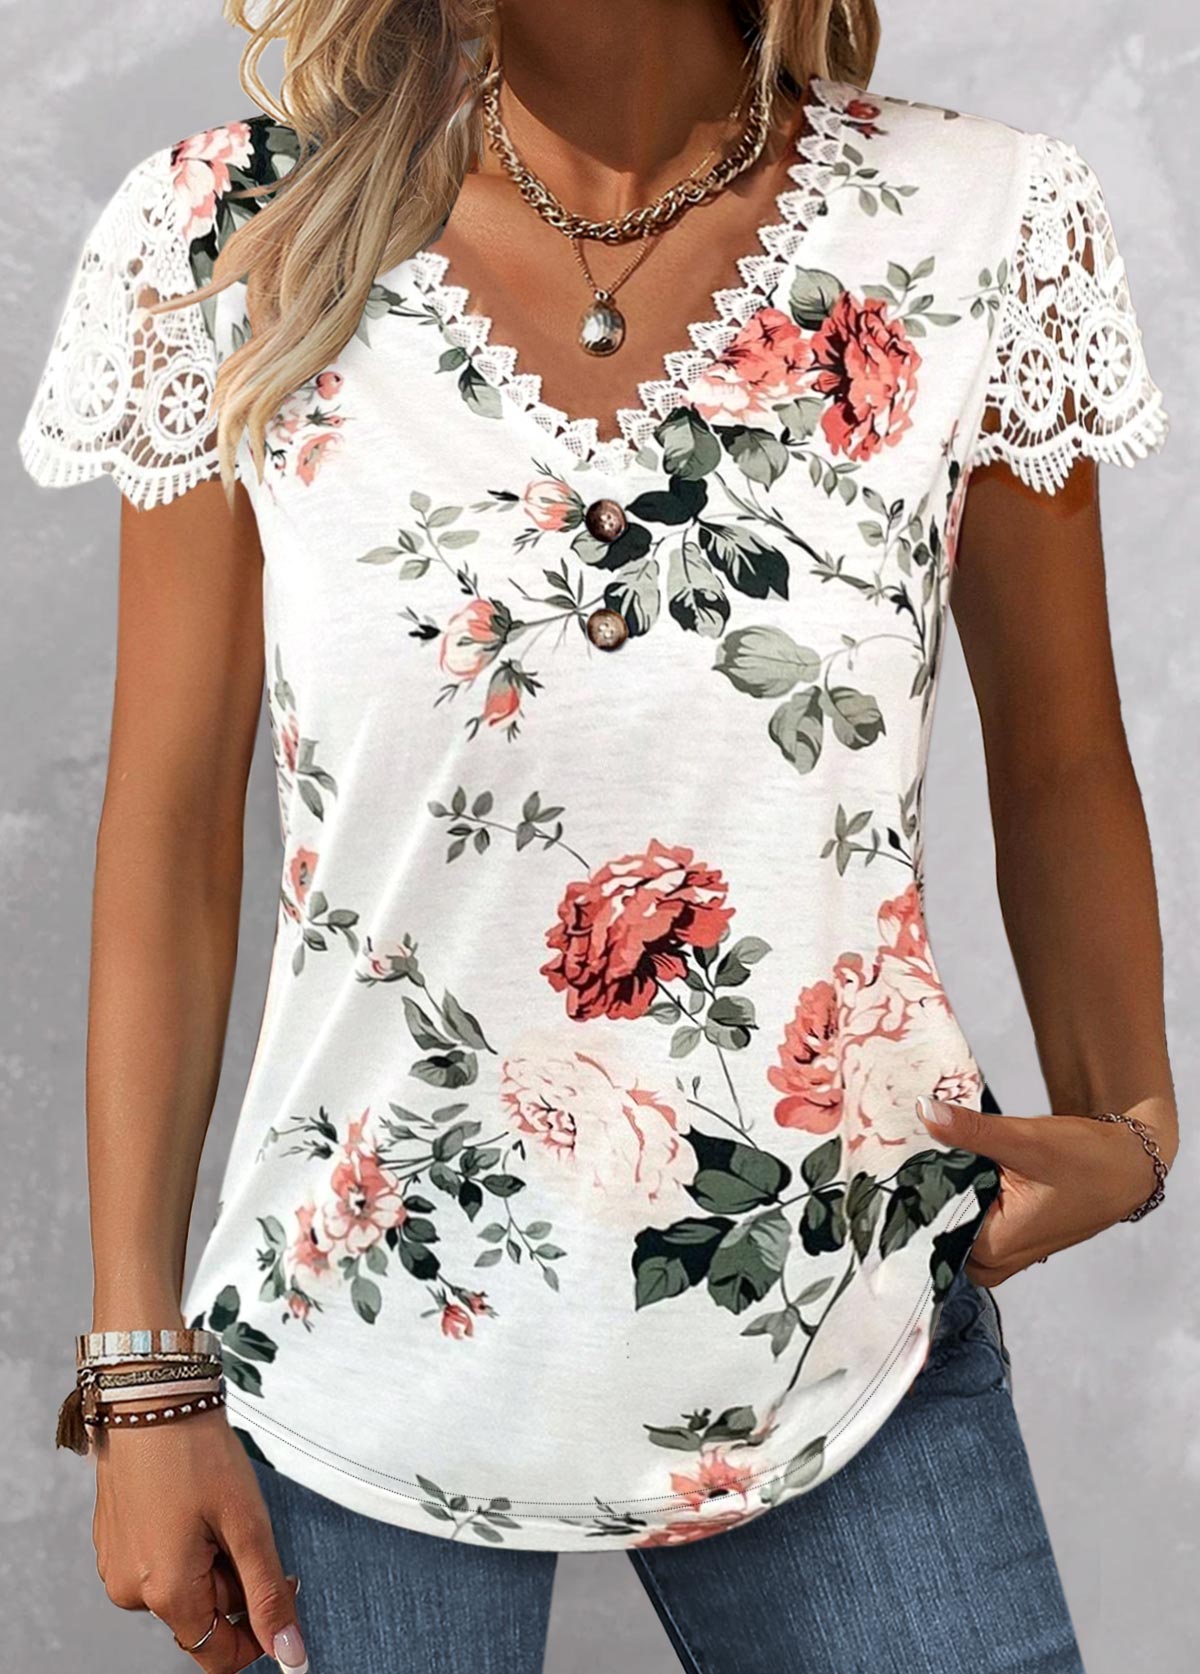 Floral Print Lace White Short Sleeve T Shirt